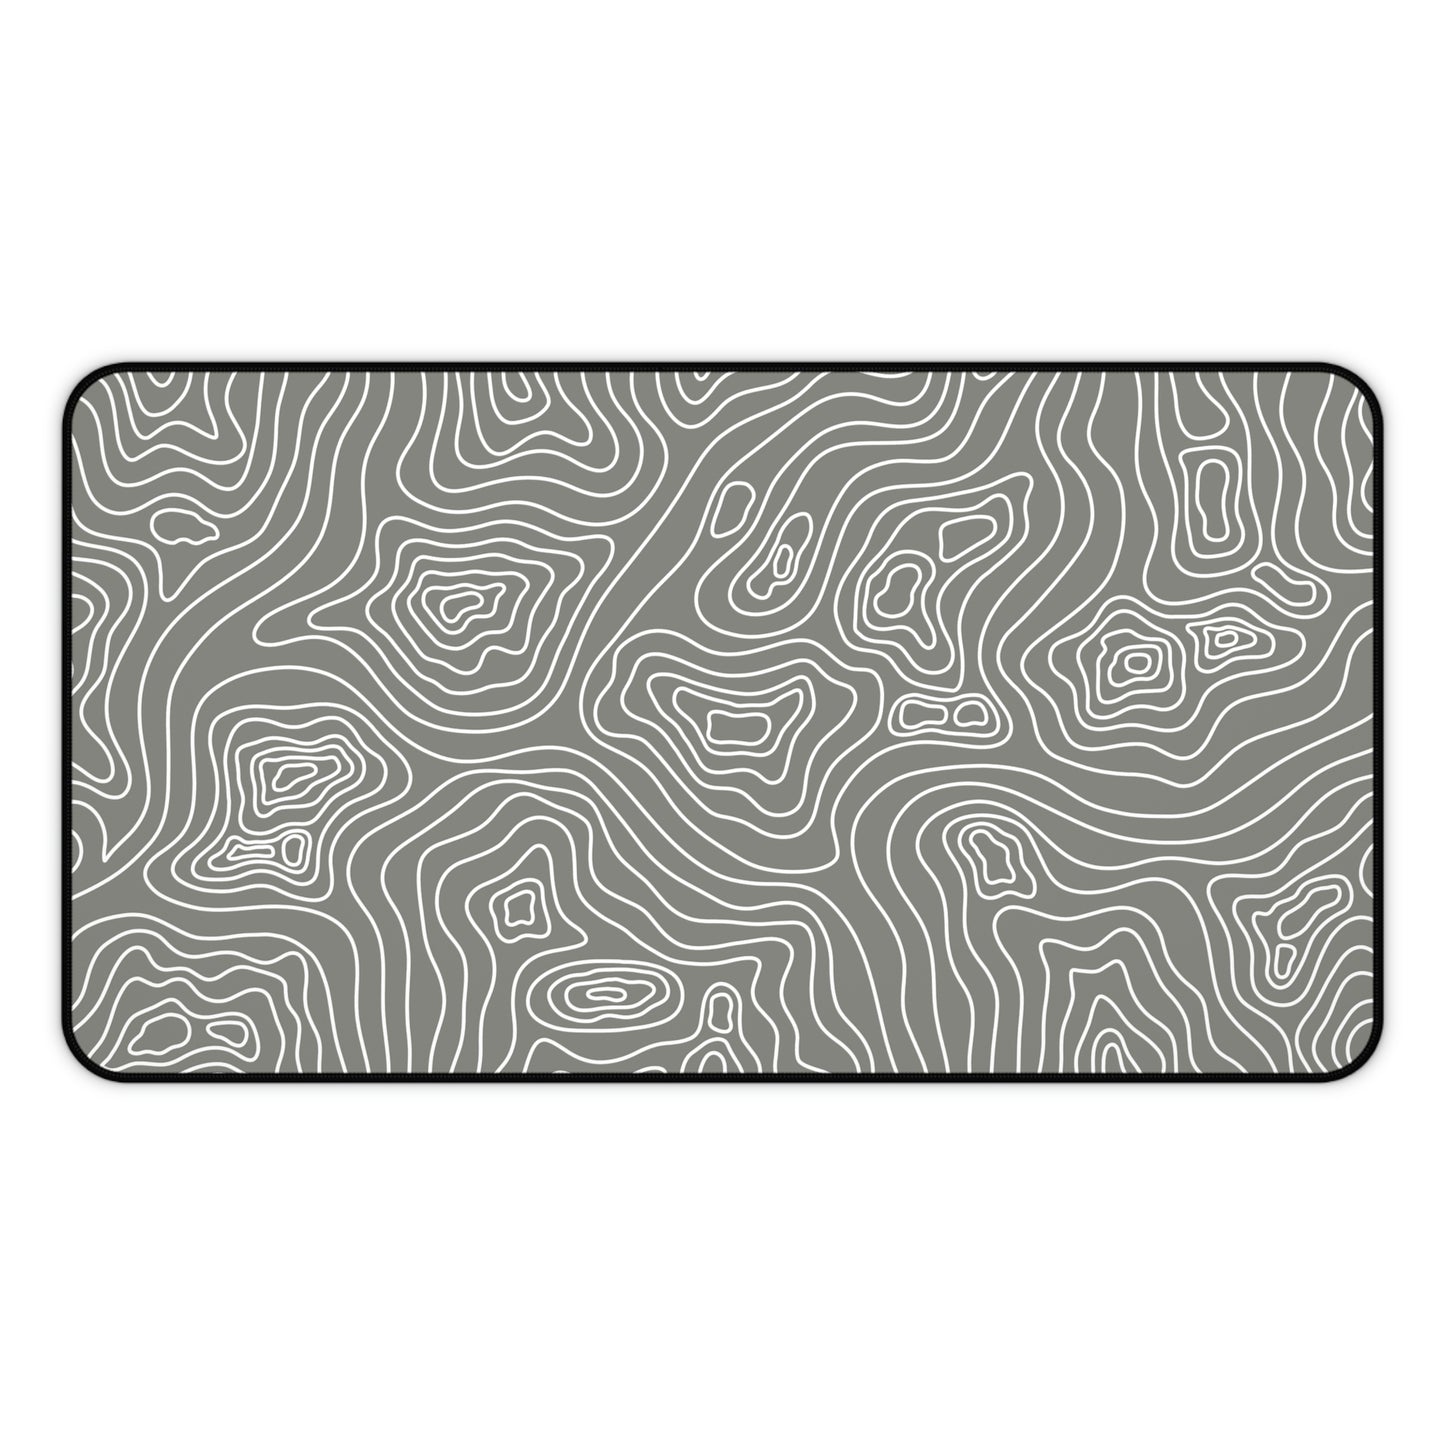 A 12" x 22" gray desk mat with white topographic lines.